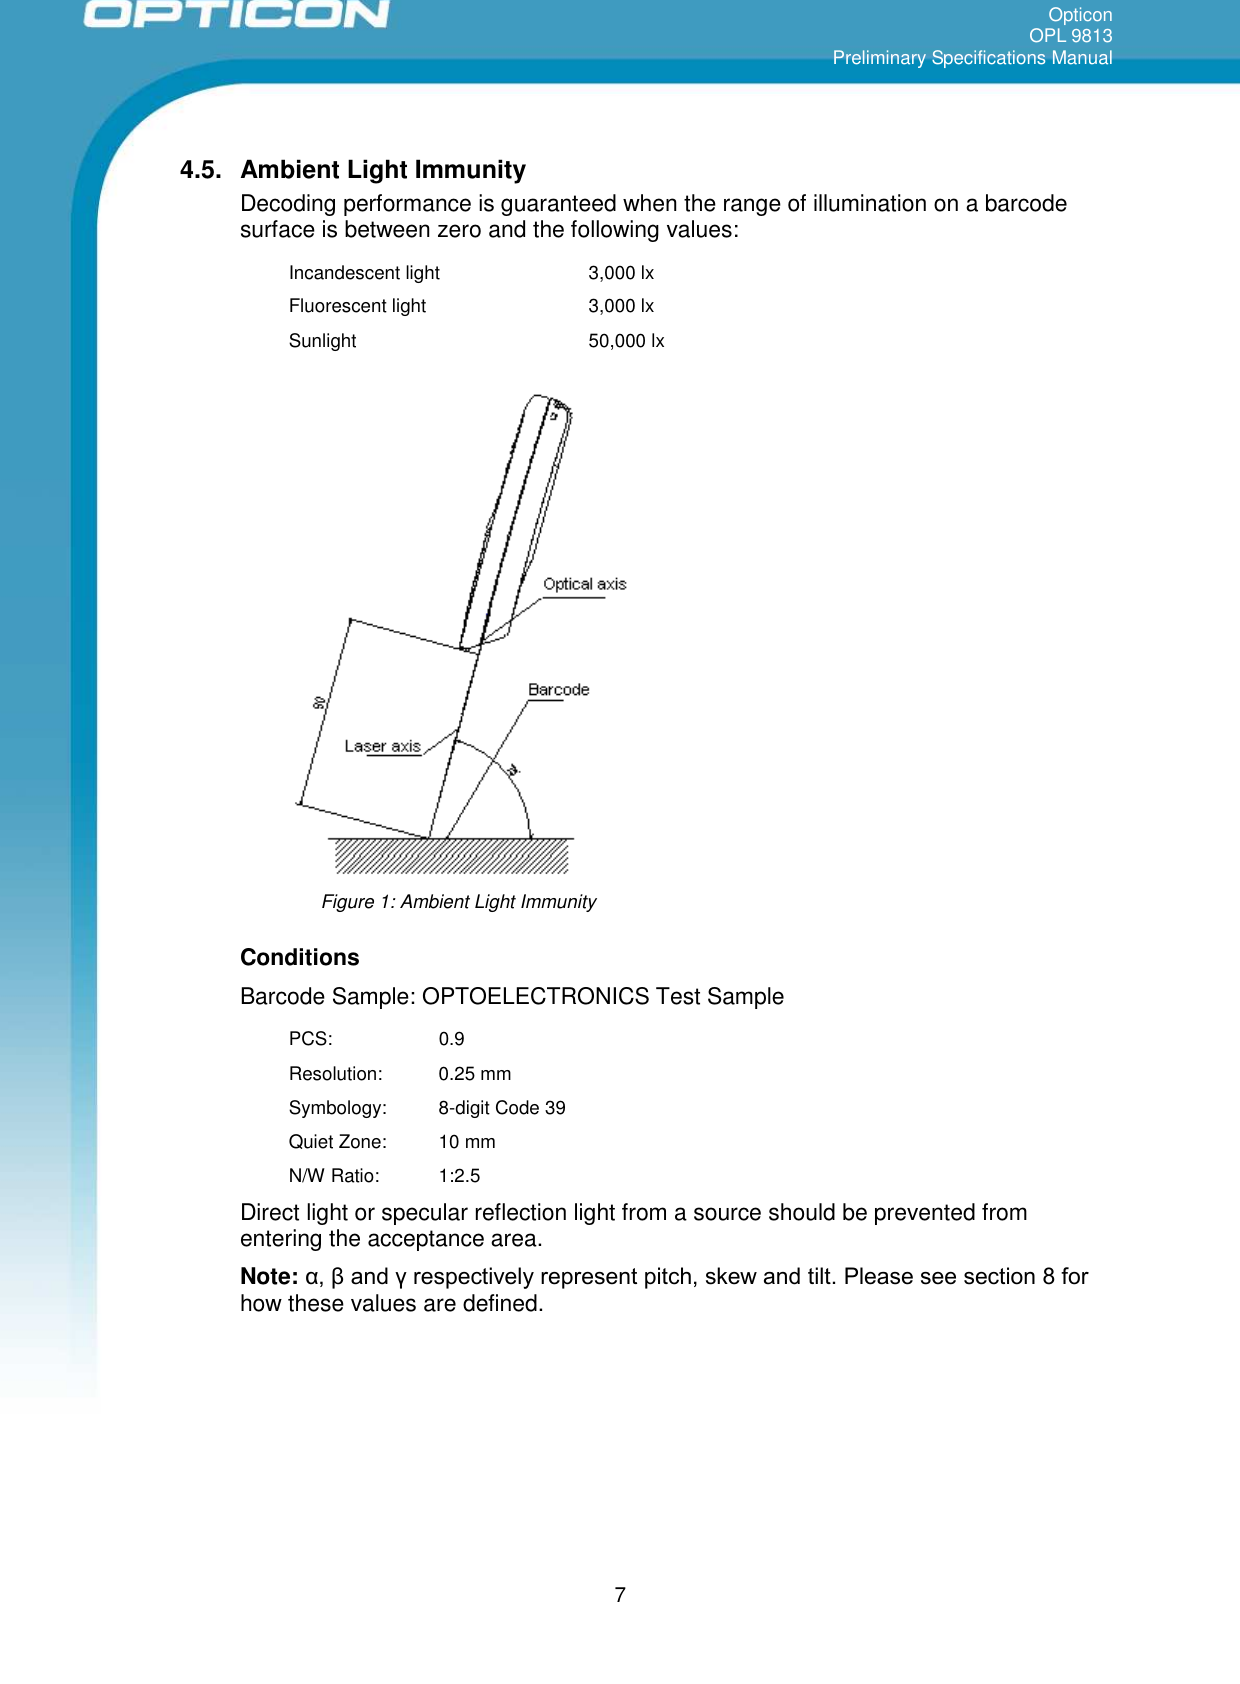 OpticonOPL 9813Preliminary Specifications Manual74.5. Ambient Light ImmunityDecoding performance is guaranteed when the range of illumination on a barcodesurface is between zero and the following values:Incandescent light 3,000 lxFluorescent light 3,000 lxSunlight 50,000 lxFigure 1: Ambient Light ImmunityConditionsBarcode Sample: OPTOELECTRONICS Test SamplePCS: 0.9Resolution: 0.25 mmSymbology: 8-digit Code 39Quiet Zone: 10 mmN/W Ratio: 1:2.5Direct light or specular reflection light from a source should be prevented fromentering the acceptance area.Note: α, β and γ respectively represent pitch, skew and tilt. Please see section 8 for how these values are defined.